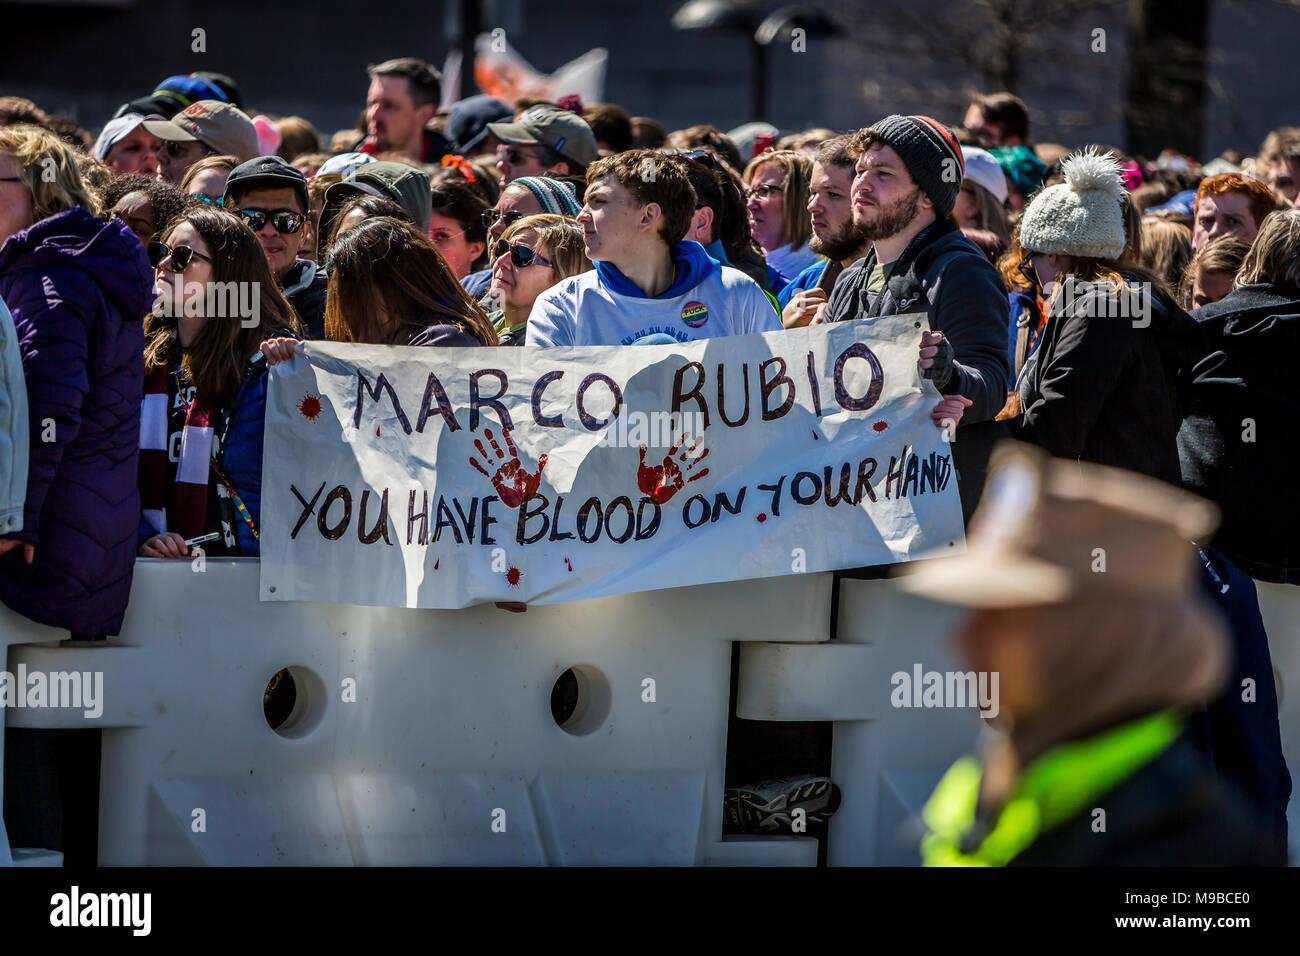 Washington Dc, United States. 24th Mar, 2018. Students from Marjory Stoneman Douglas High School in Florida, the scene of a mass shooting Feb. 14, were joined by over 800 thousand people as they march in a nationwide protest demanding sensible gun control laws. More than 830 protests occurred, in every American state and globally. The march follows a nationwide student walkout earlier this month. Another walkout is planned for April 20, the 19th anniversary of the mass shooting at Columbine High School in Colorado. Credit: Michael Nigro/Pacific Press/Alamy Live News Stock Photo